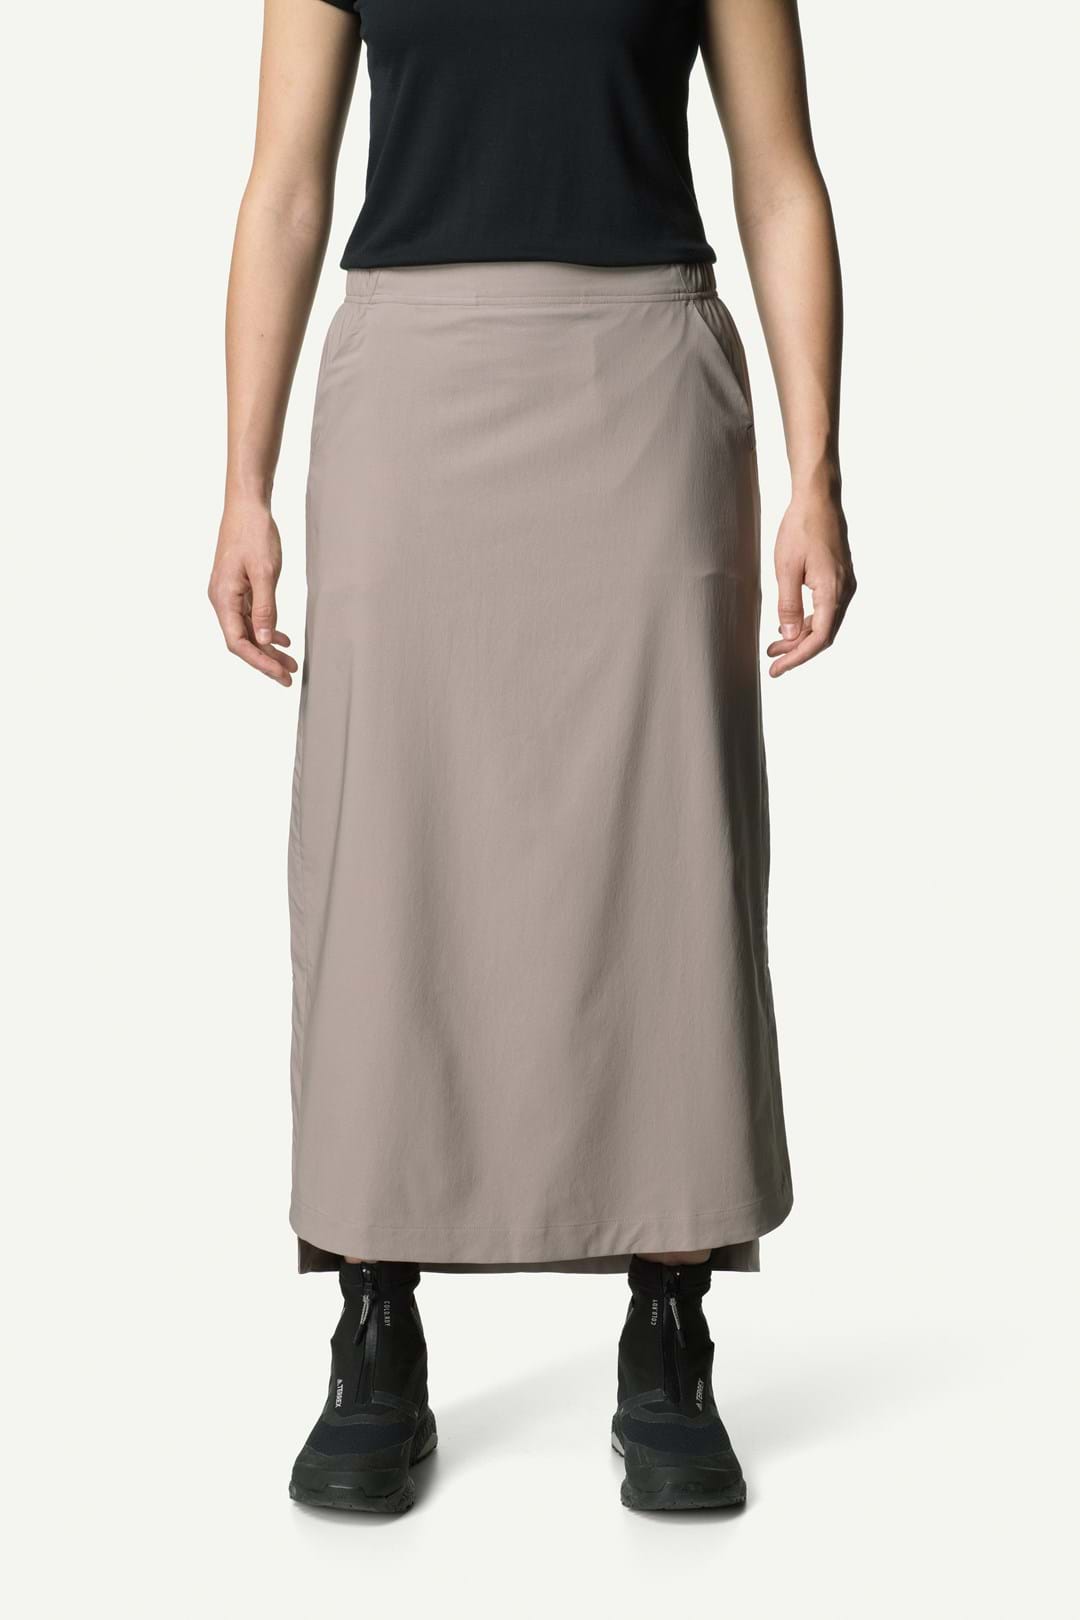 W's Walkabout Skirt